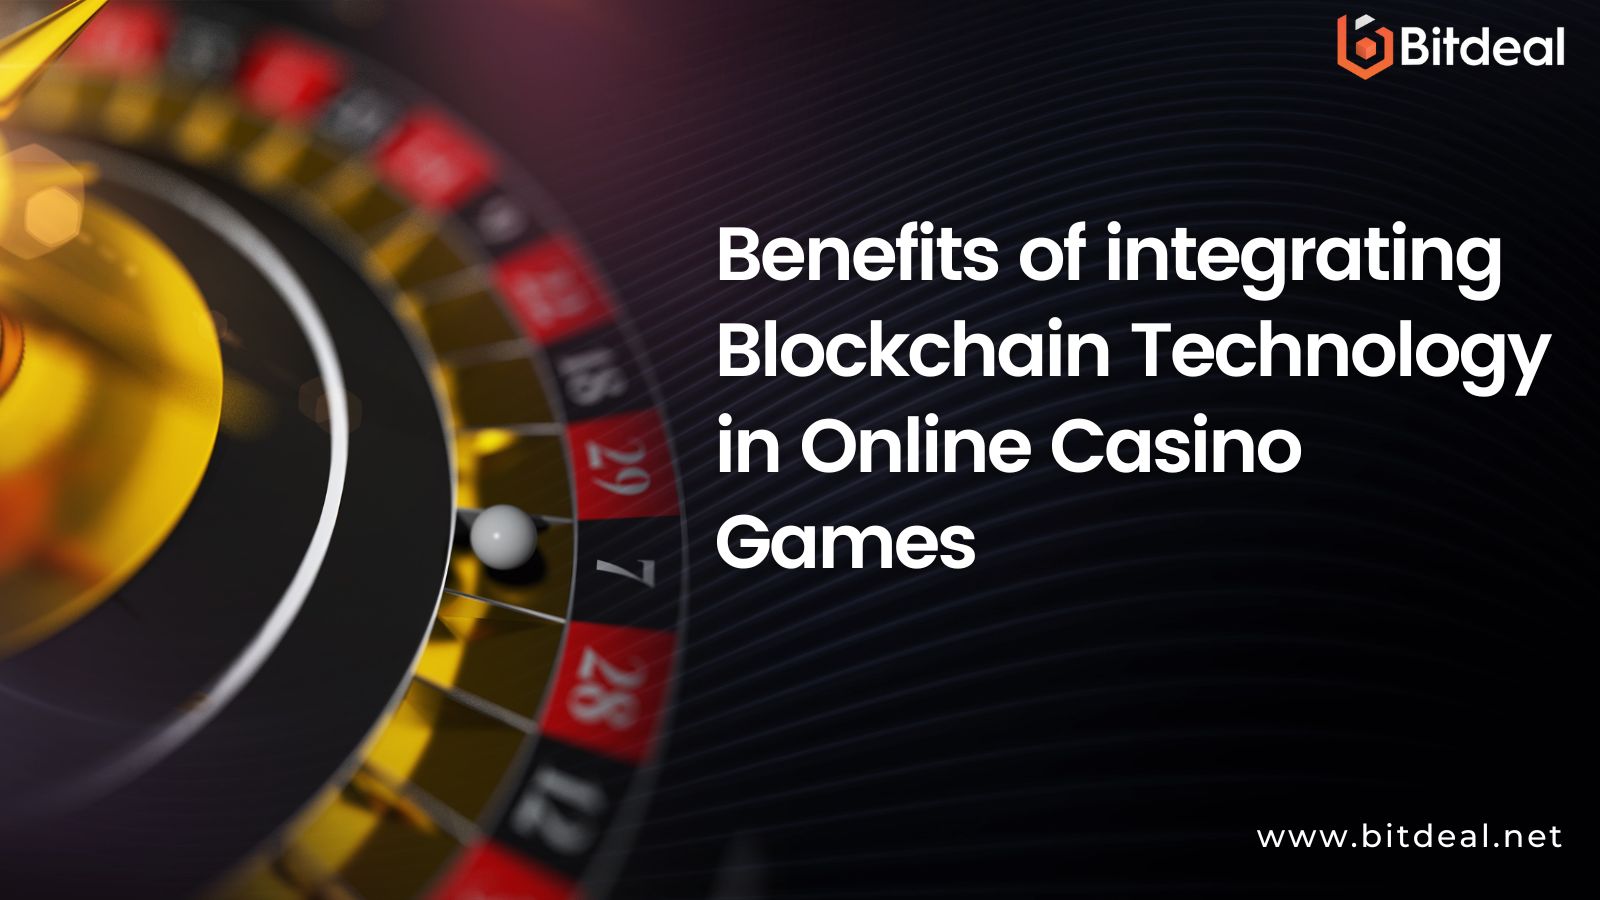 Benefits of integrating Blockchain Technology in Online Casino Games